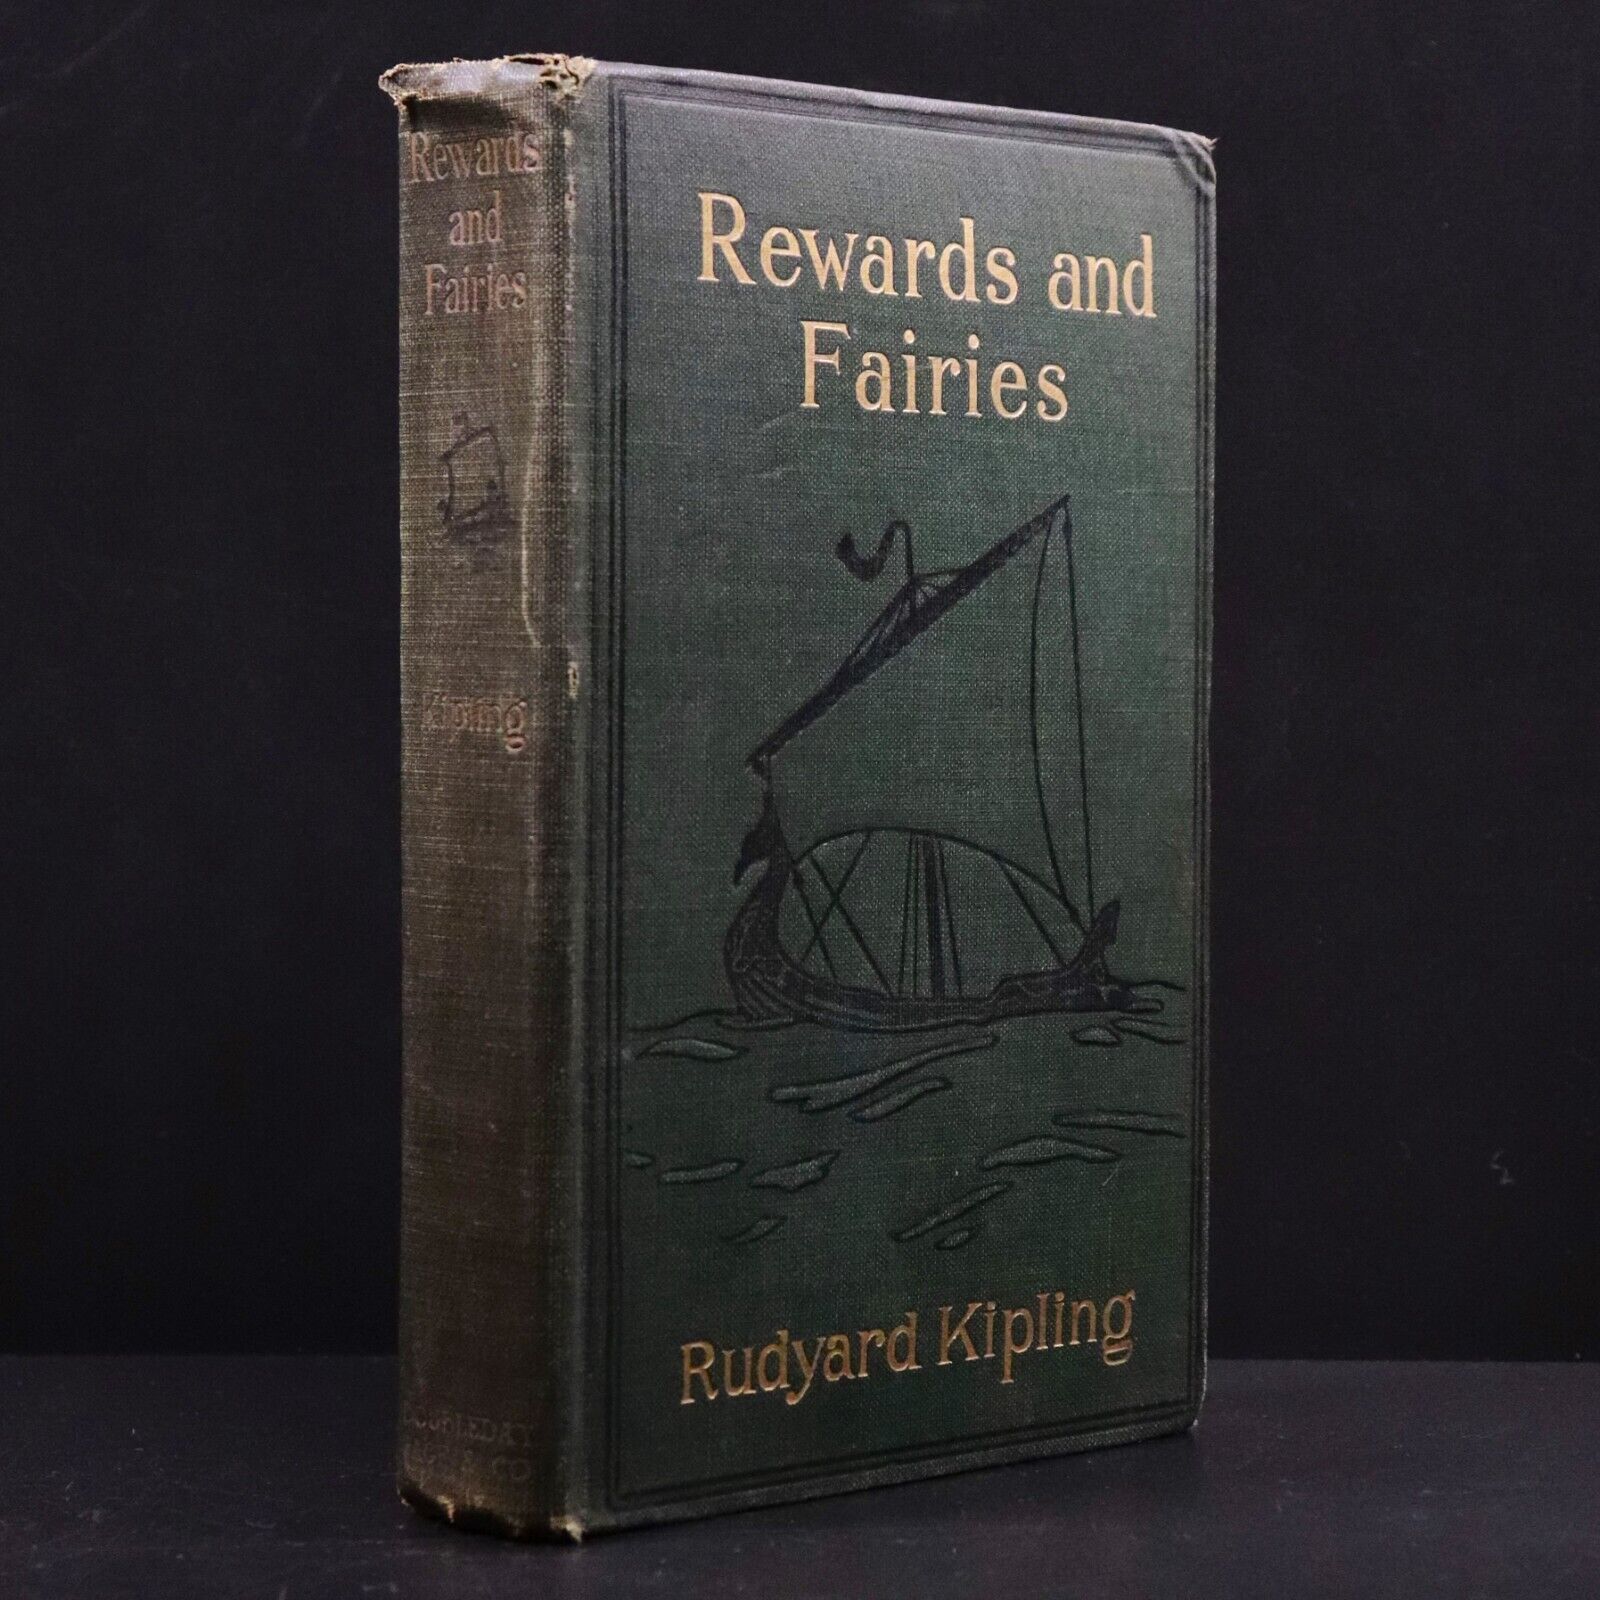 1919 Rewards and Fairies by Rudyard Kipling Antique Fiction Book Illustrated